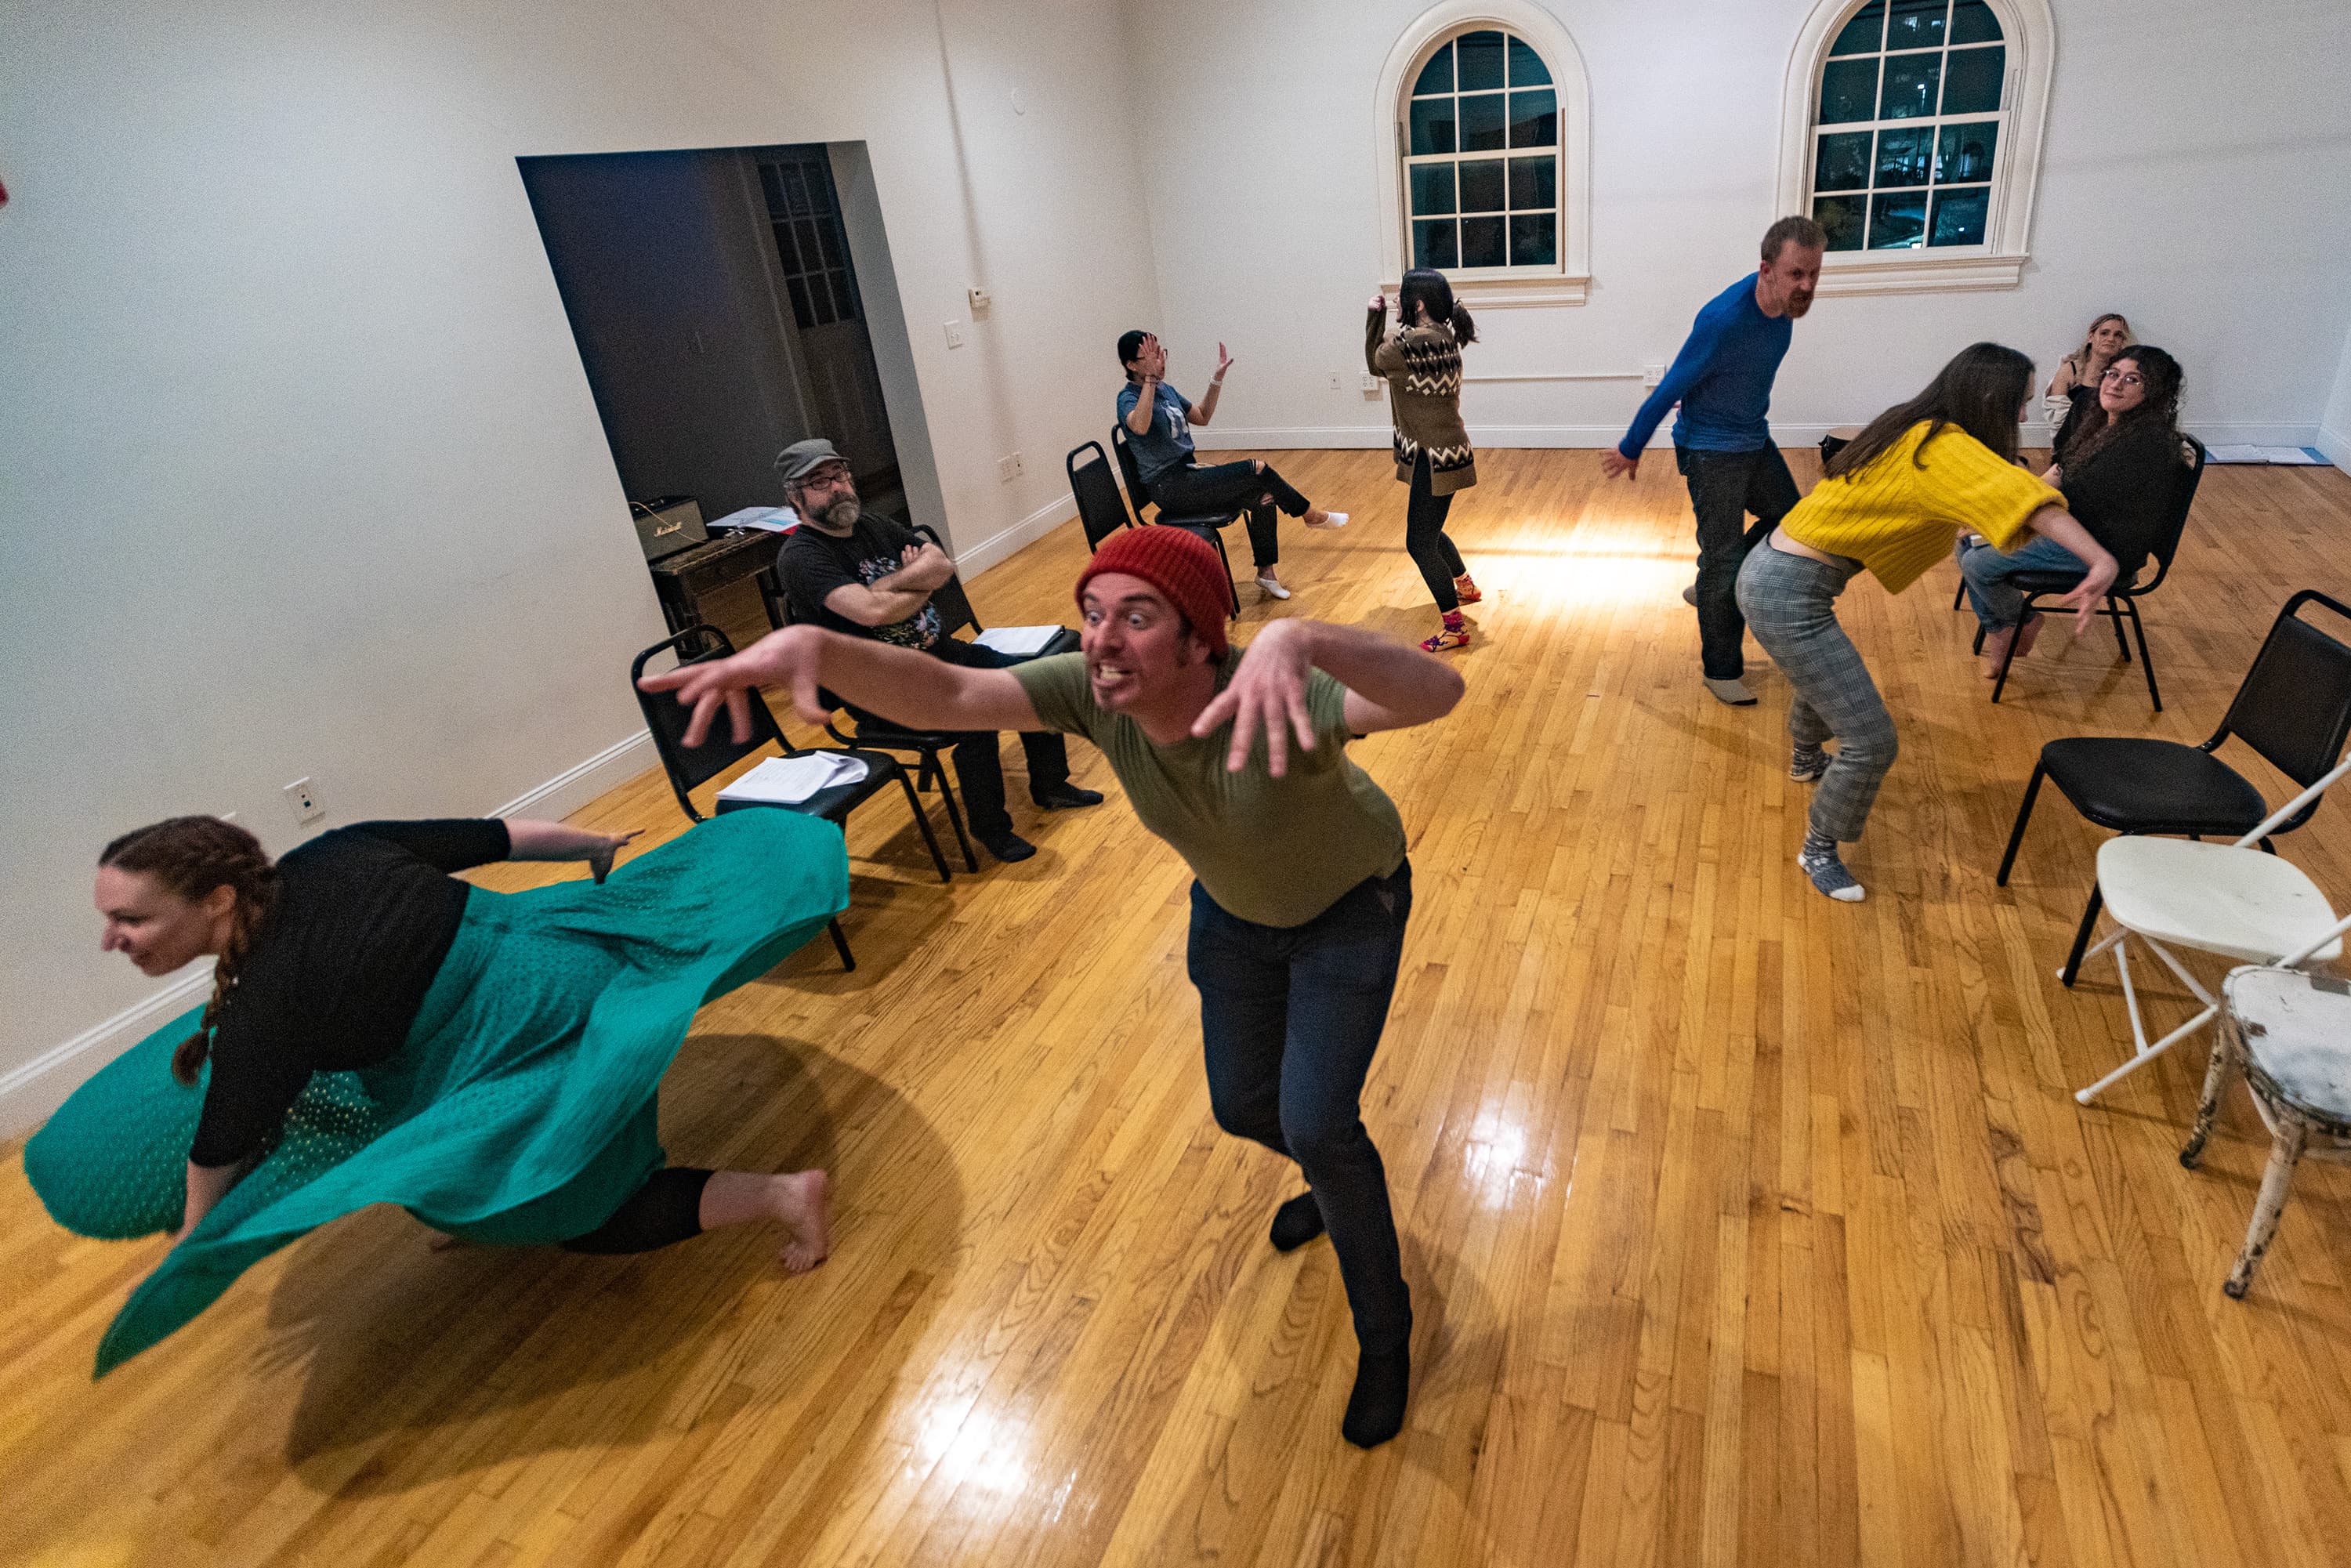 The cast of “T: An MBTA Musical” rehearse at the Somerville Armory ahead of their new season of shows beginning in March at the Rockwell in Davis Square. (Jesse Costa/WBUR)